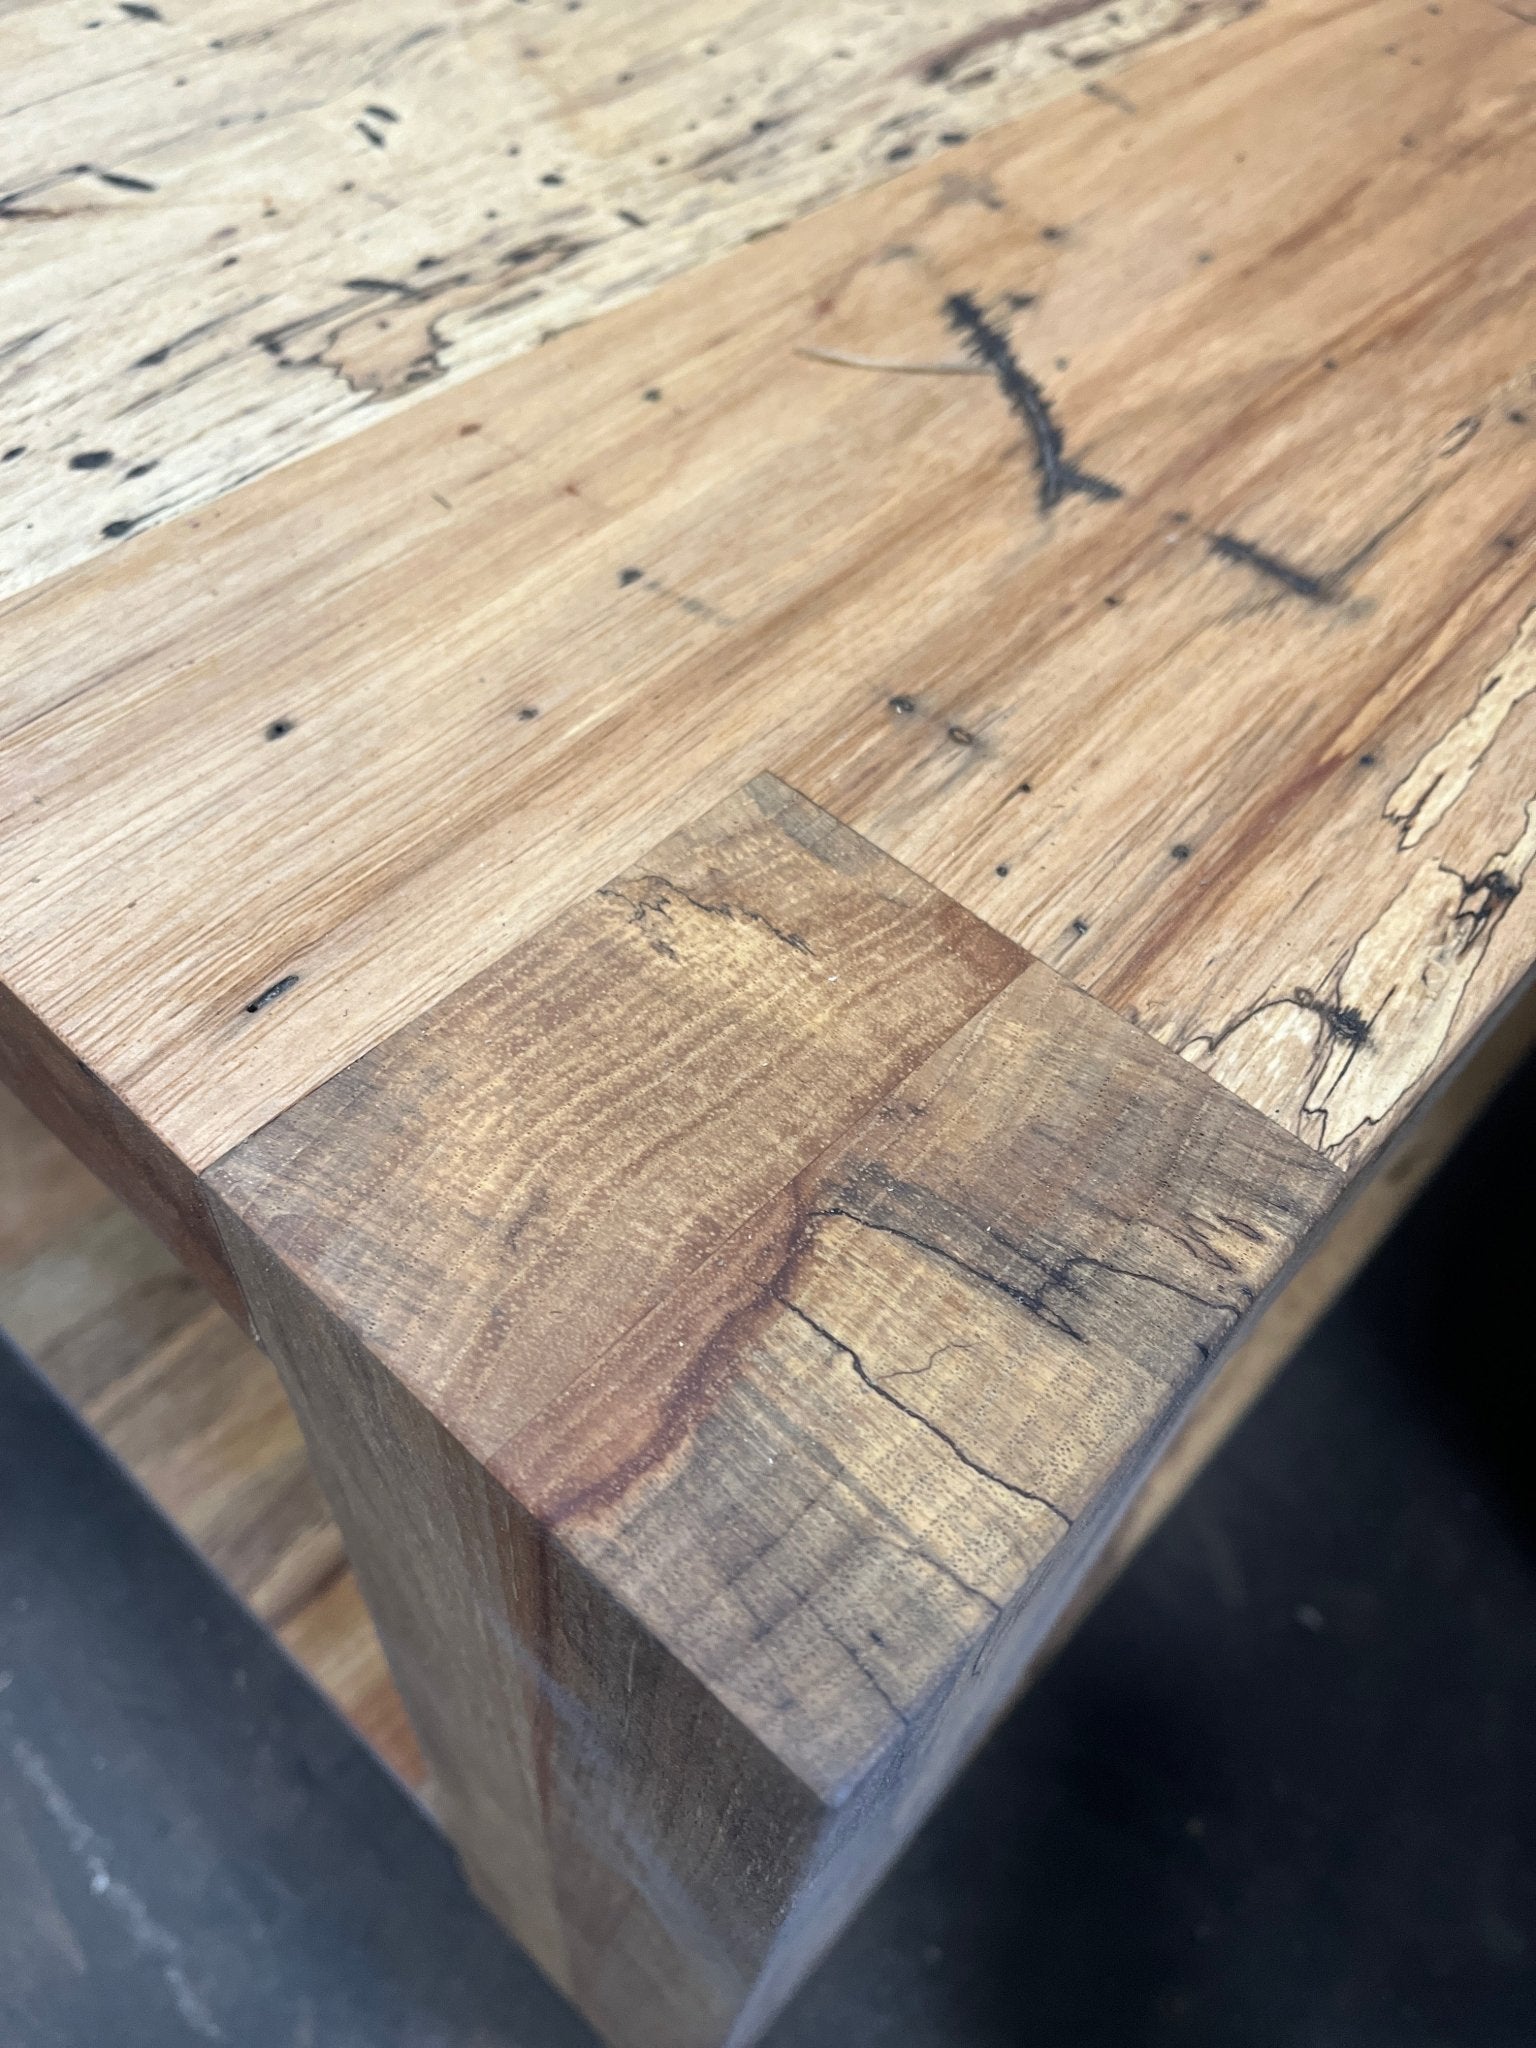 The Challenges and Rewards of Spalted Wood - Alabama Sawyer